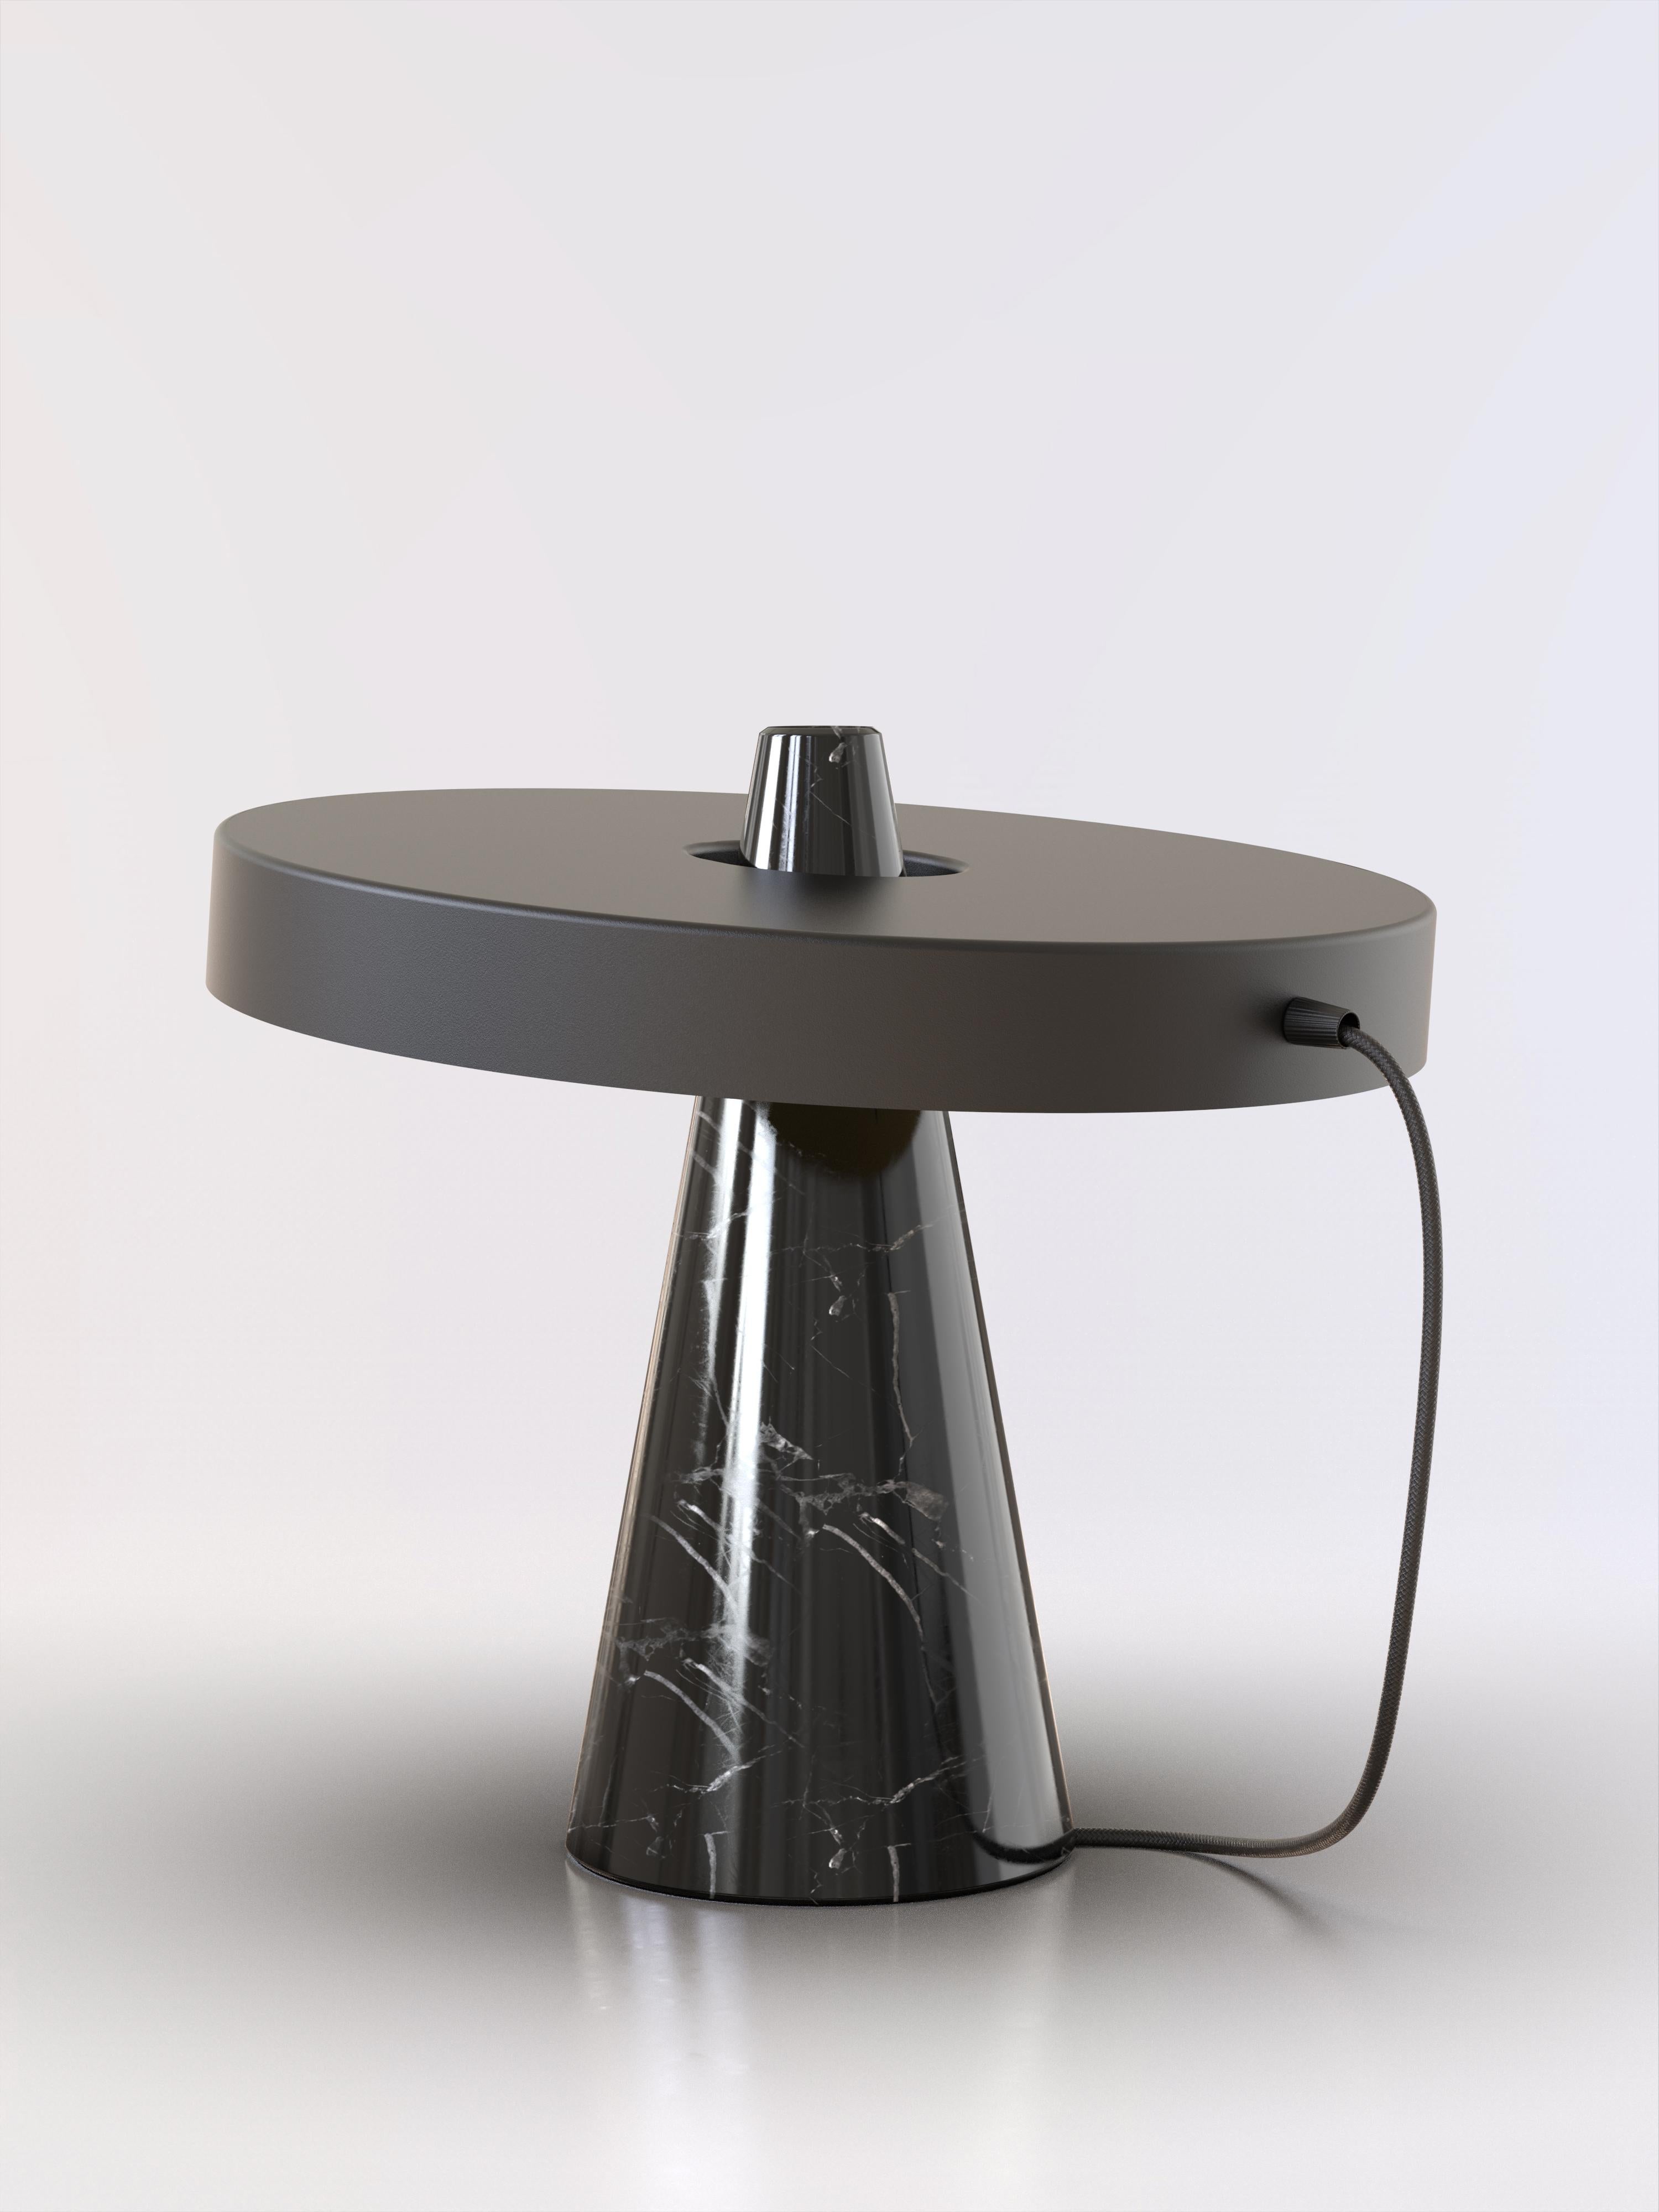 Table lamp with Marquinha black stone base and black paint lightshade.
The light shade is disconnected from the stone base and free to tilt, allowing multiple change of styles.